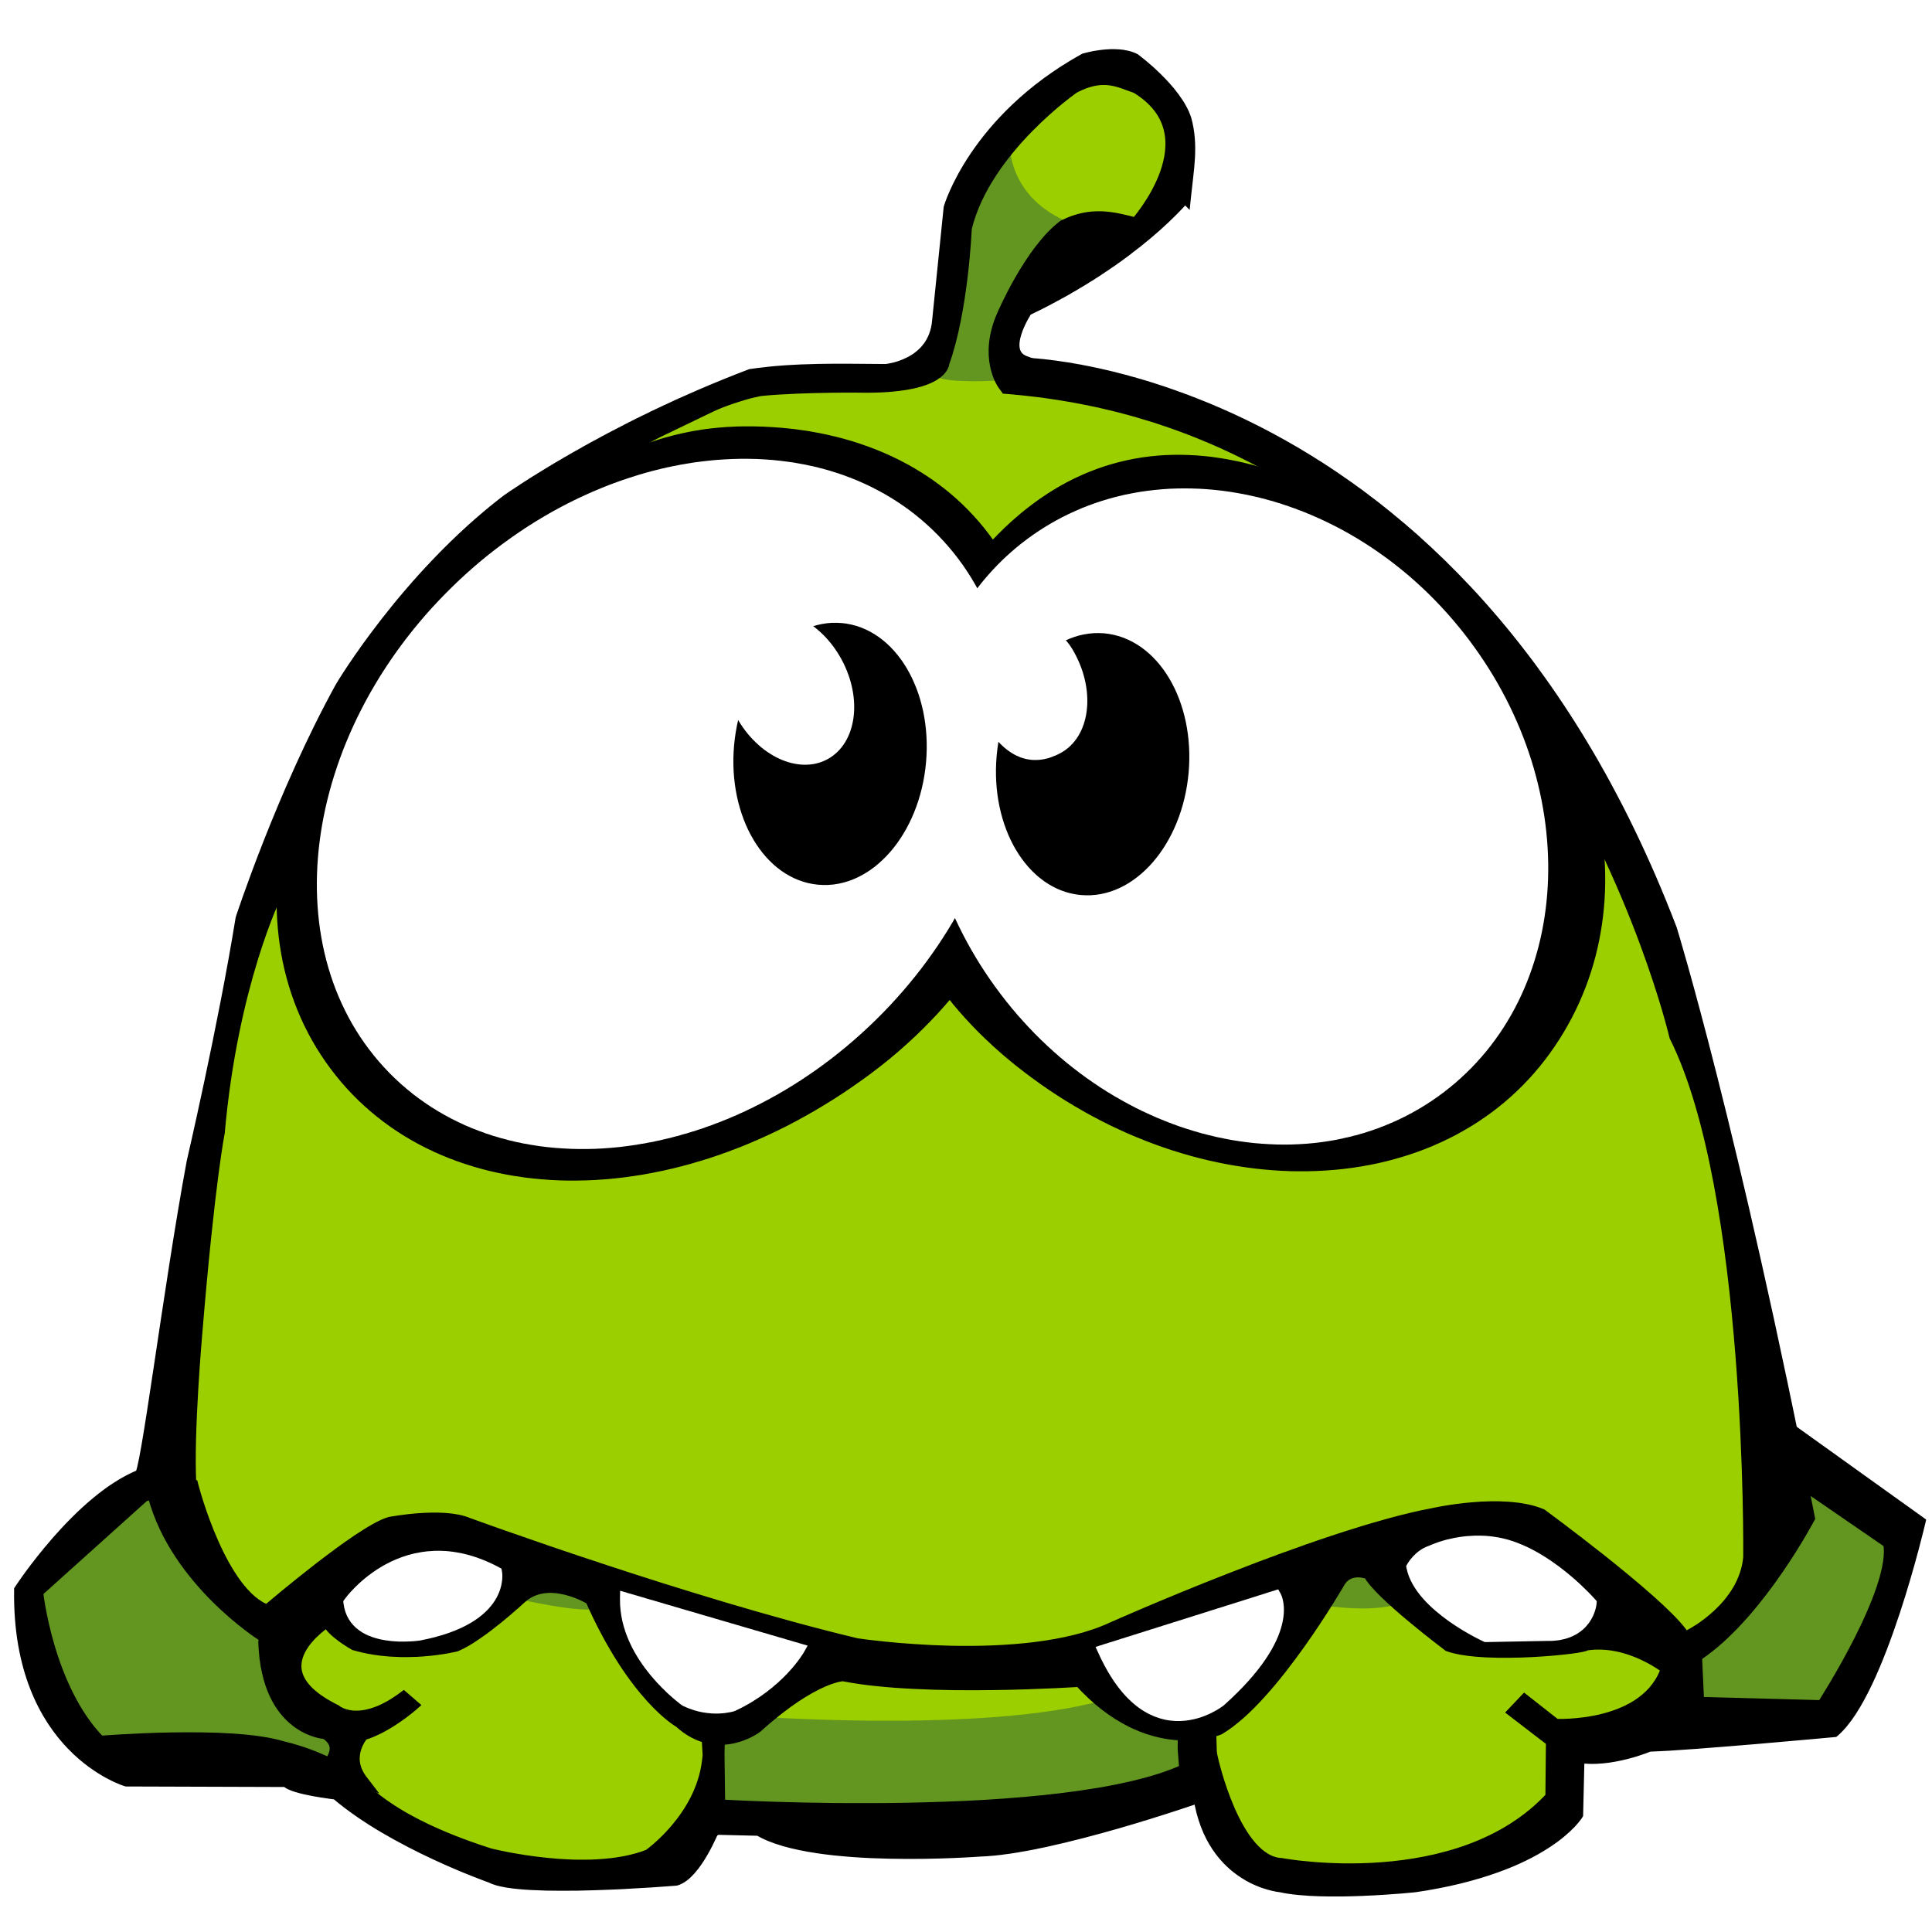 Free Cut The Rope Wiki, Download Free Clip Art, Free Clip Art